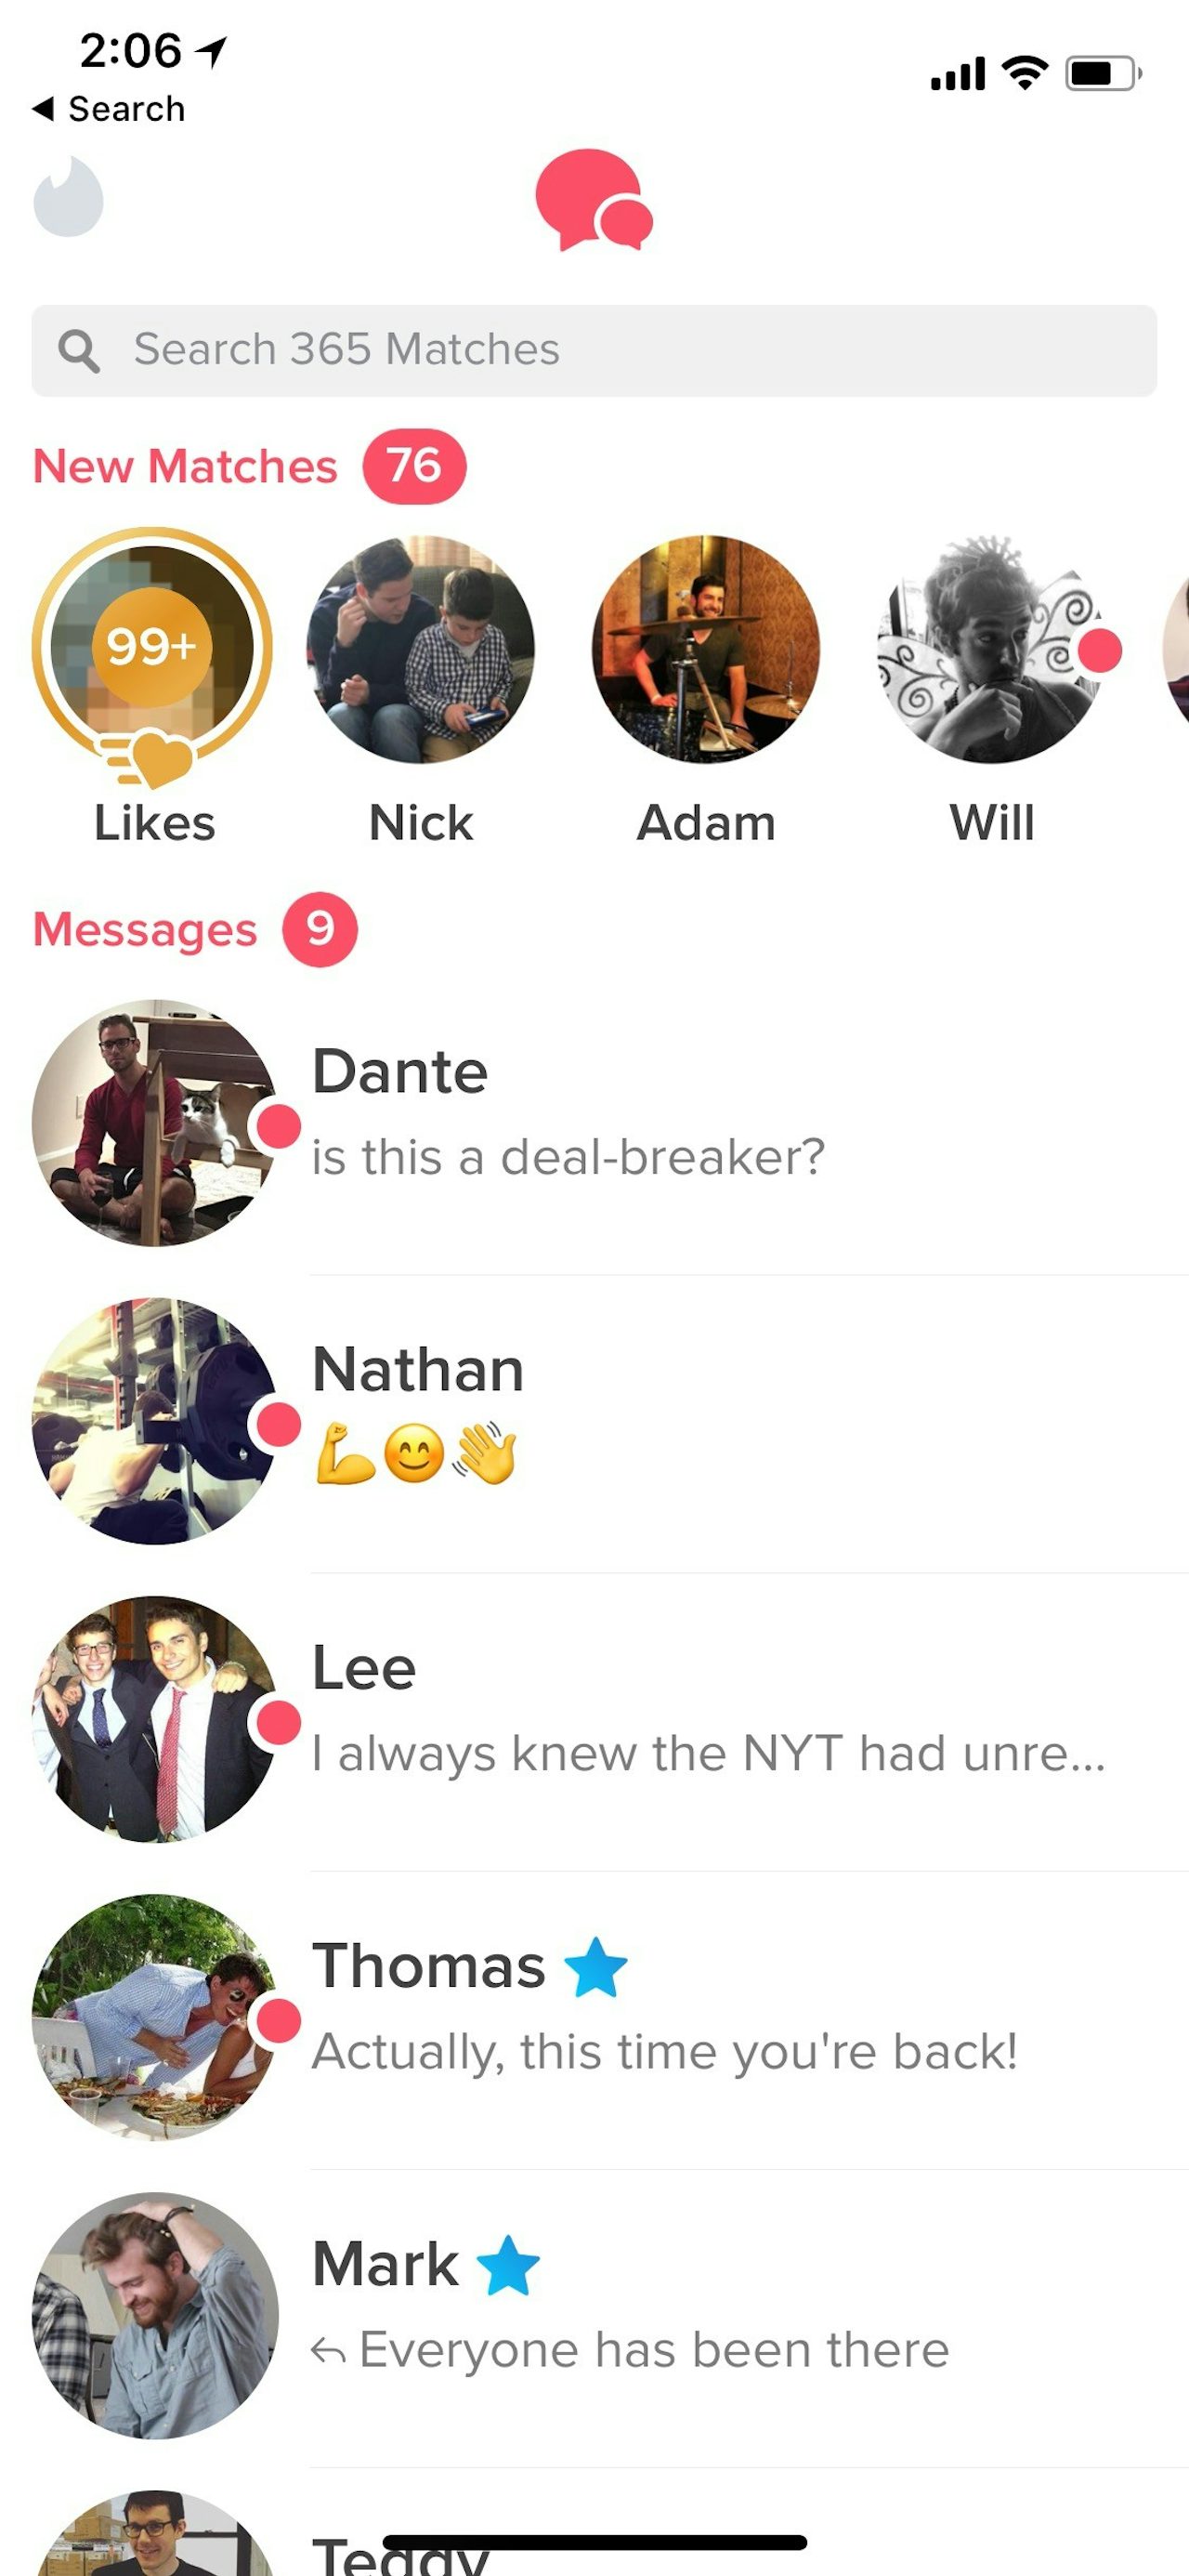 15 mistakes that turn women off on Tinder, according to 15 women